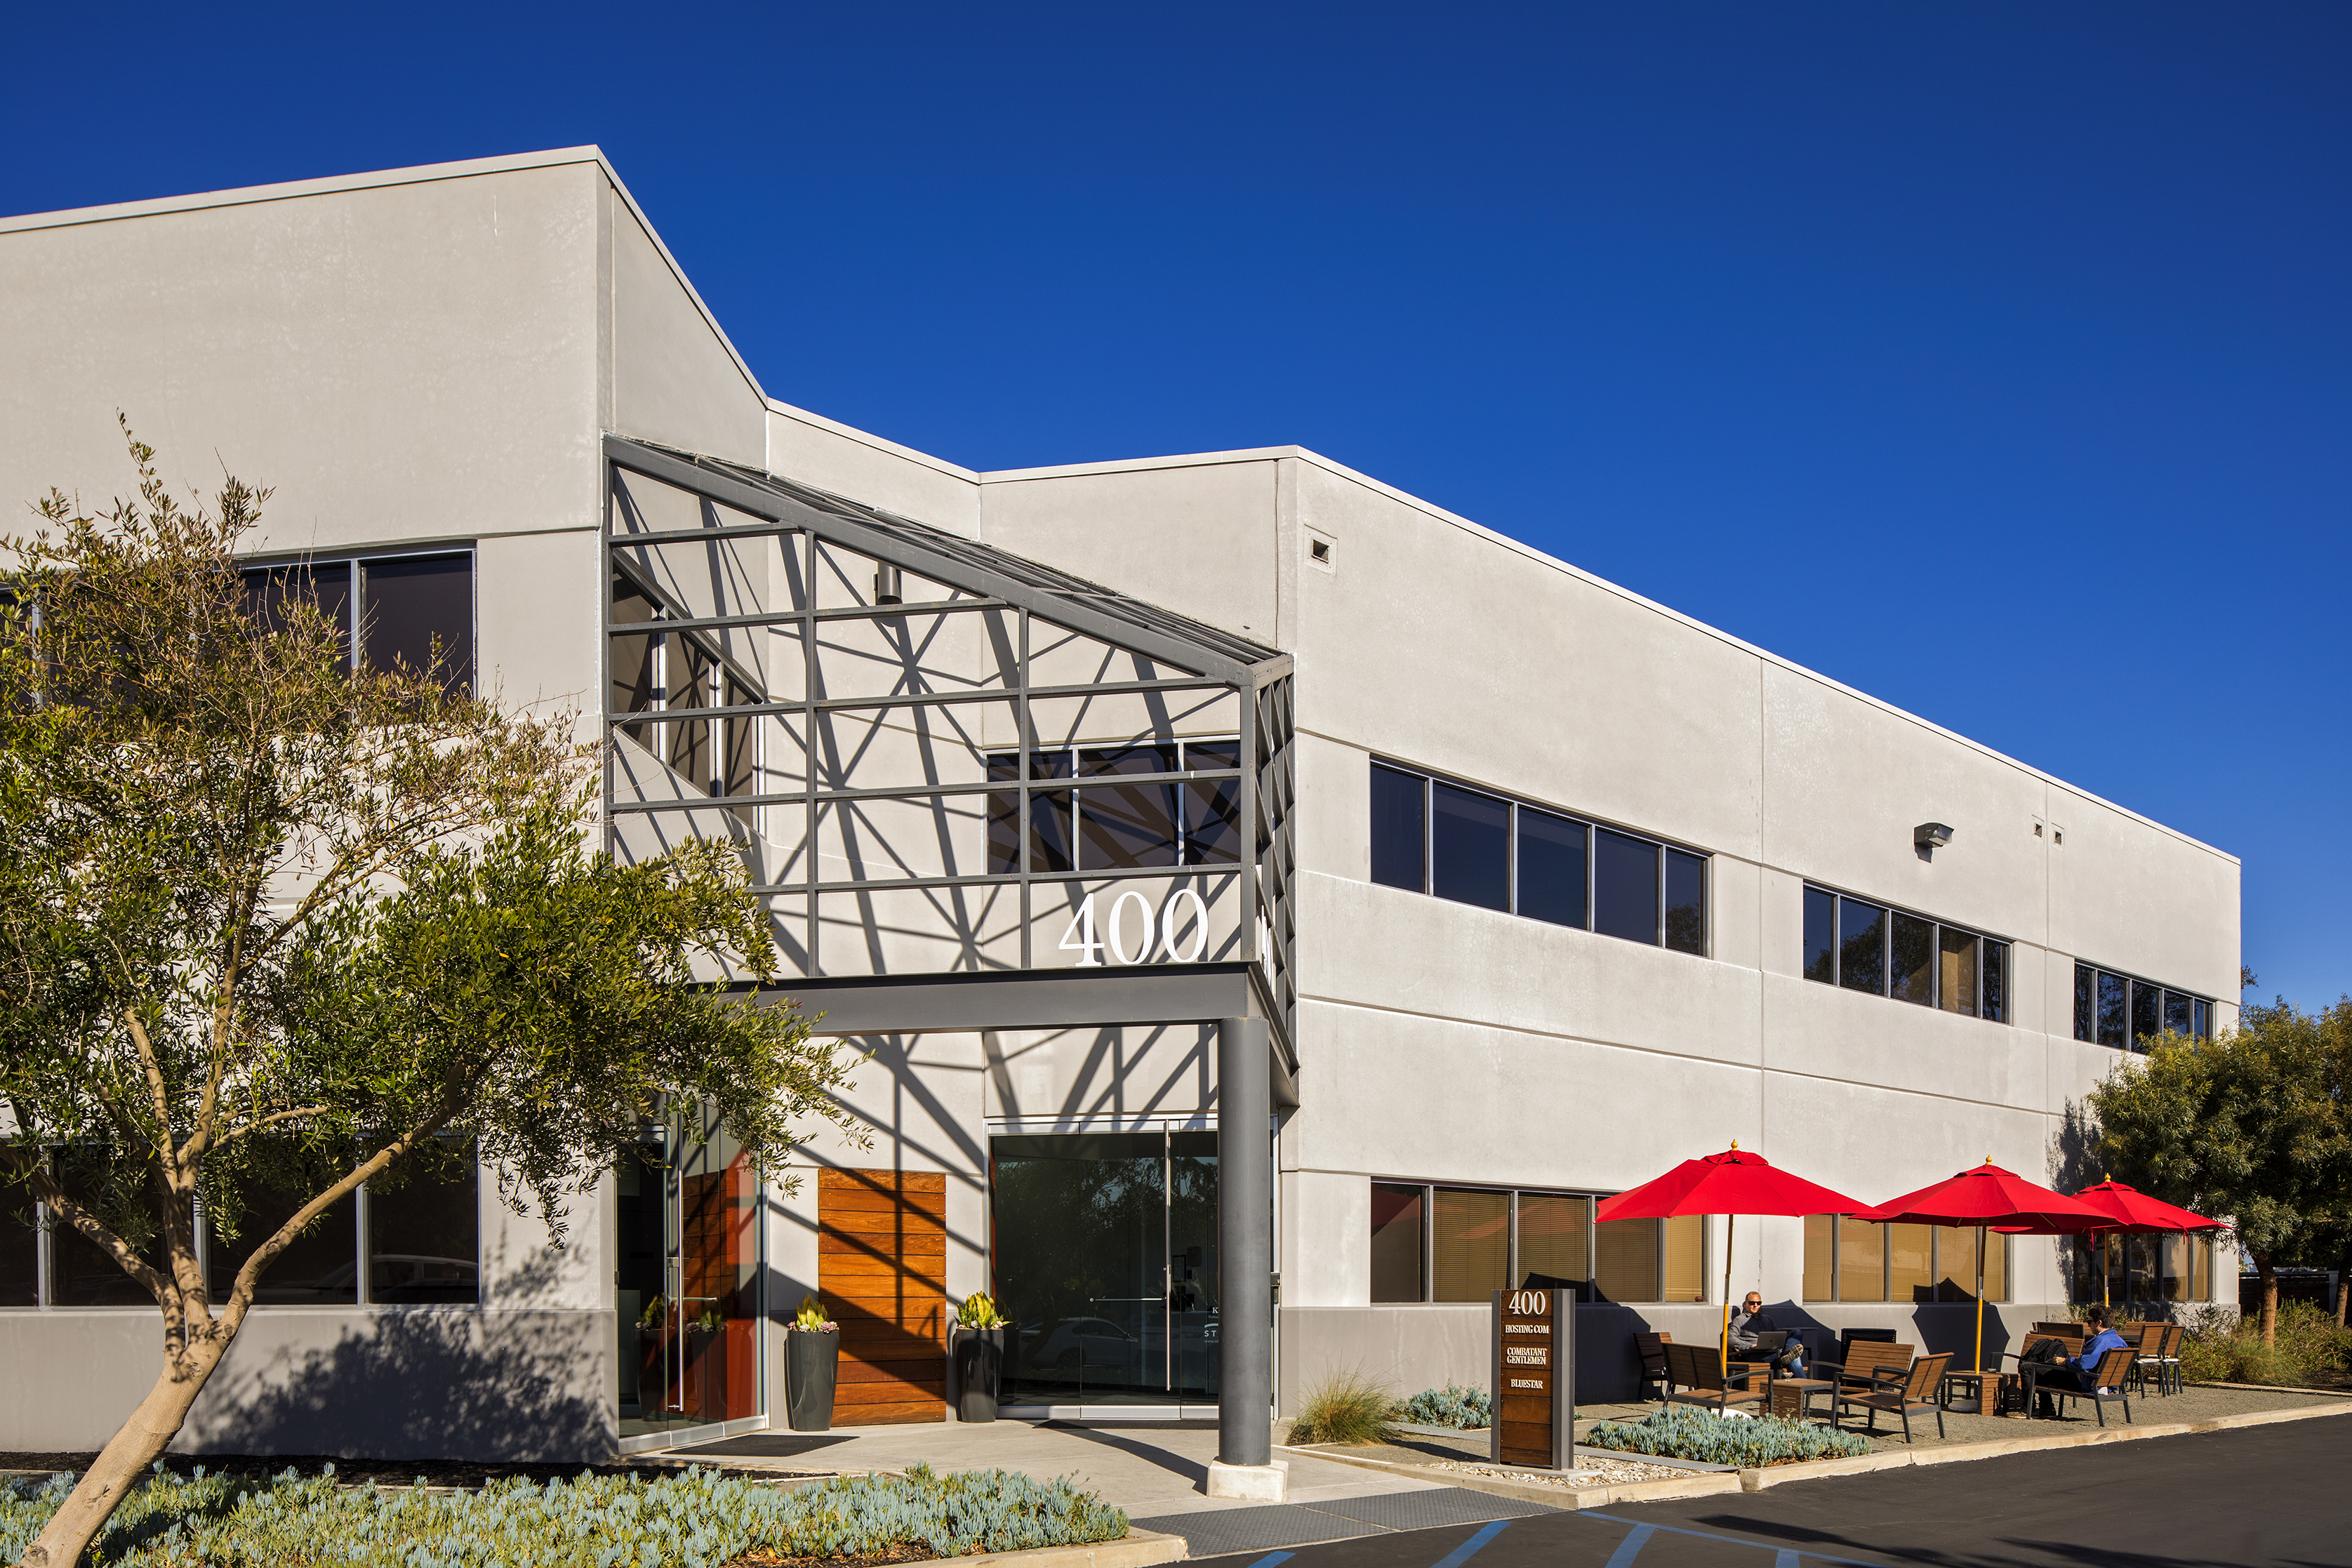 KBS Growth & Income REIT Sells California Office Building to Private Investor